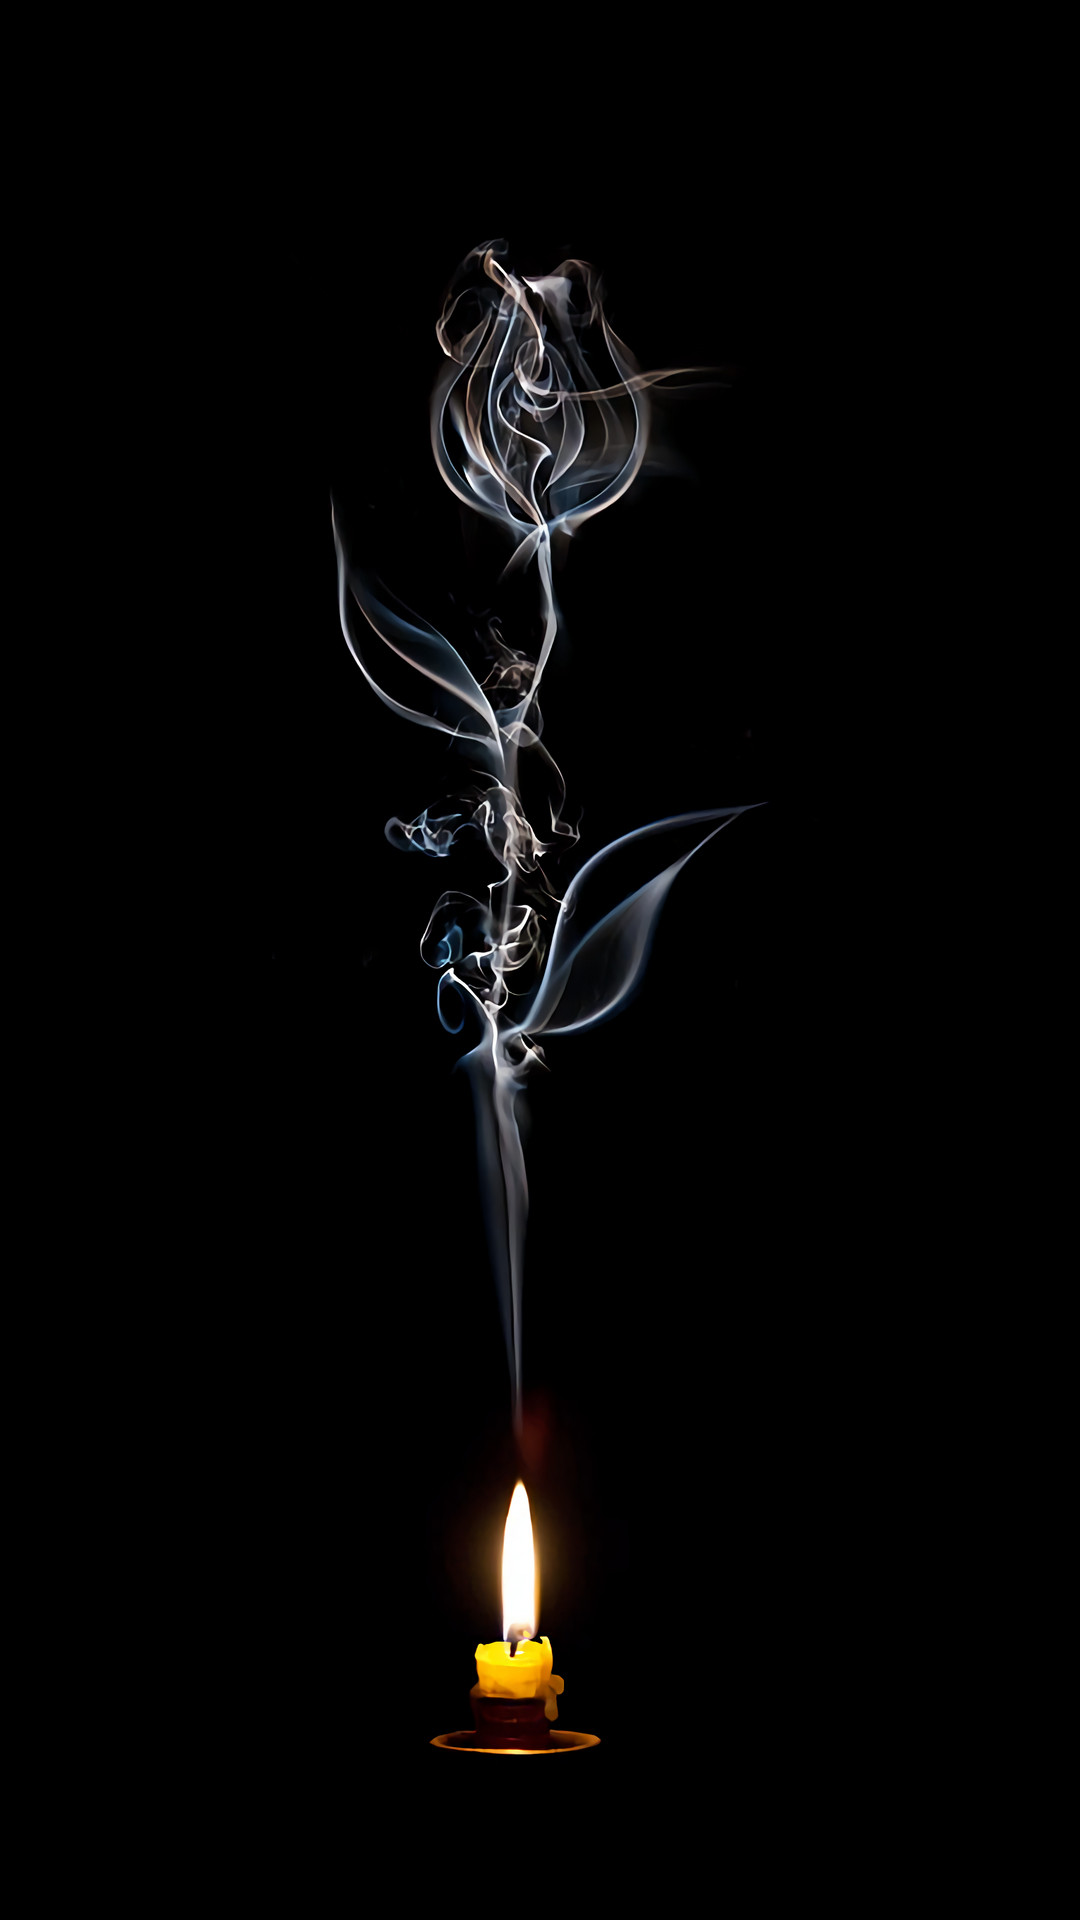 1080x1920 Smoke Flower - Tap to see more of the best abstract & patterned collection  of wallpapers